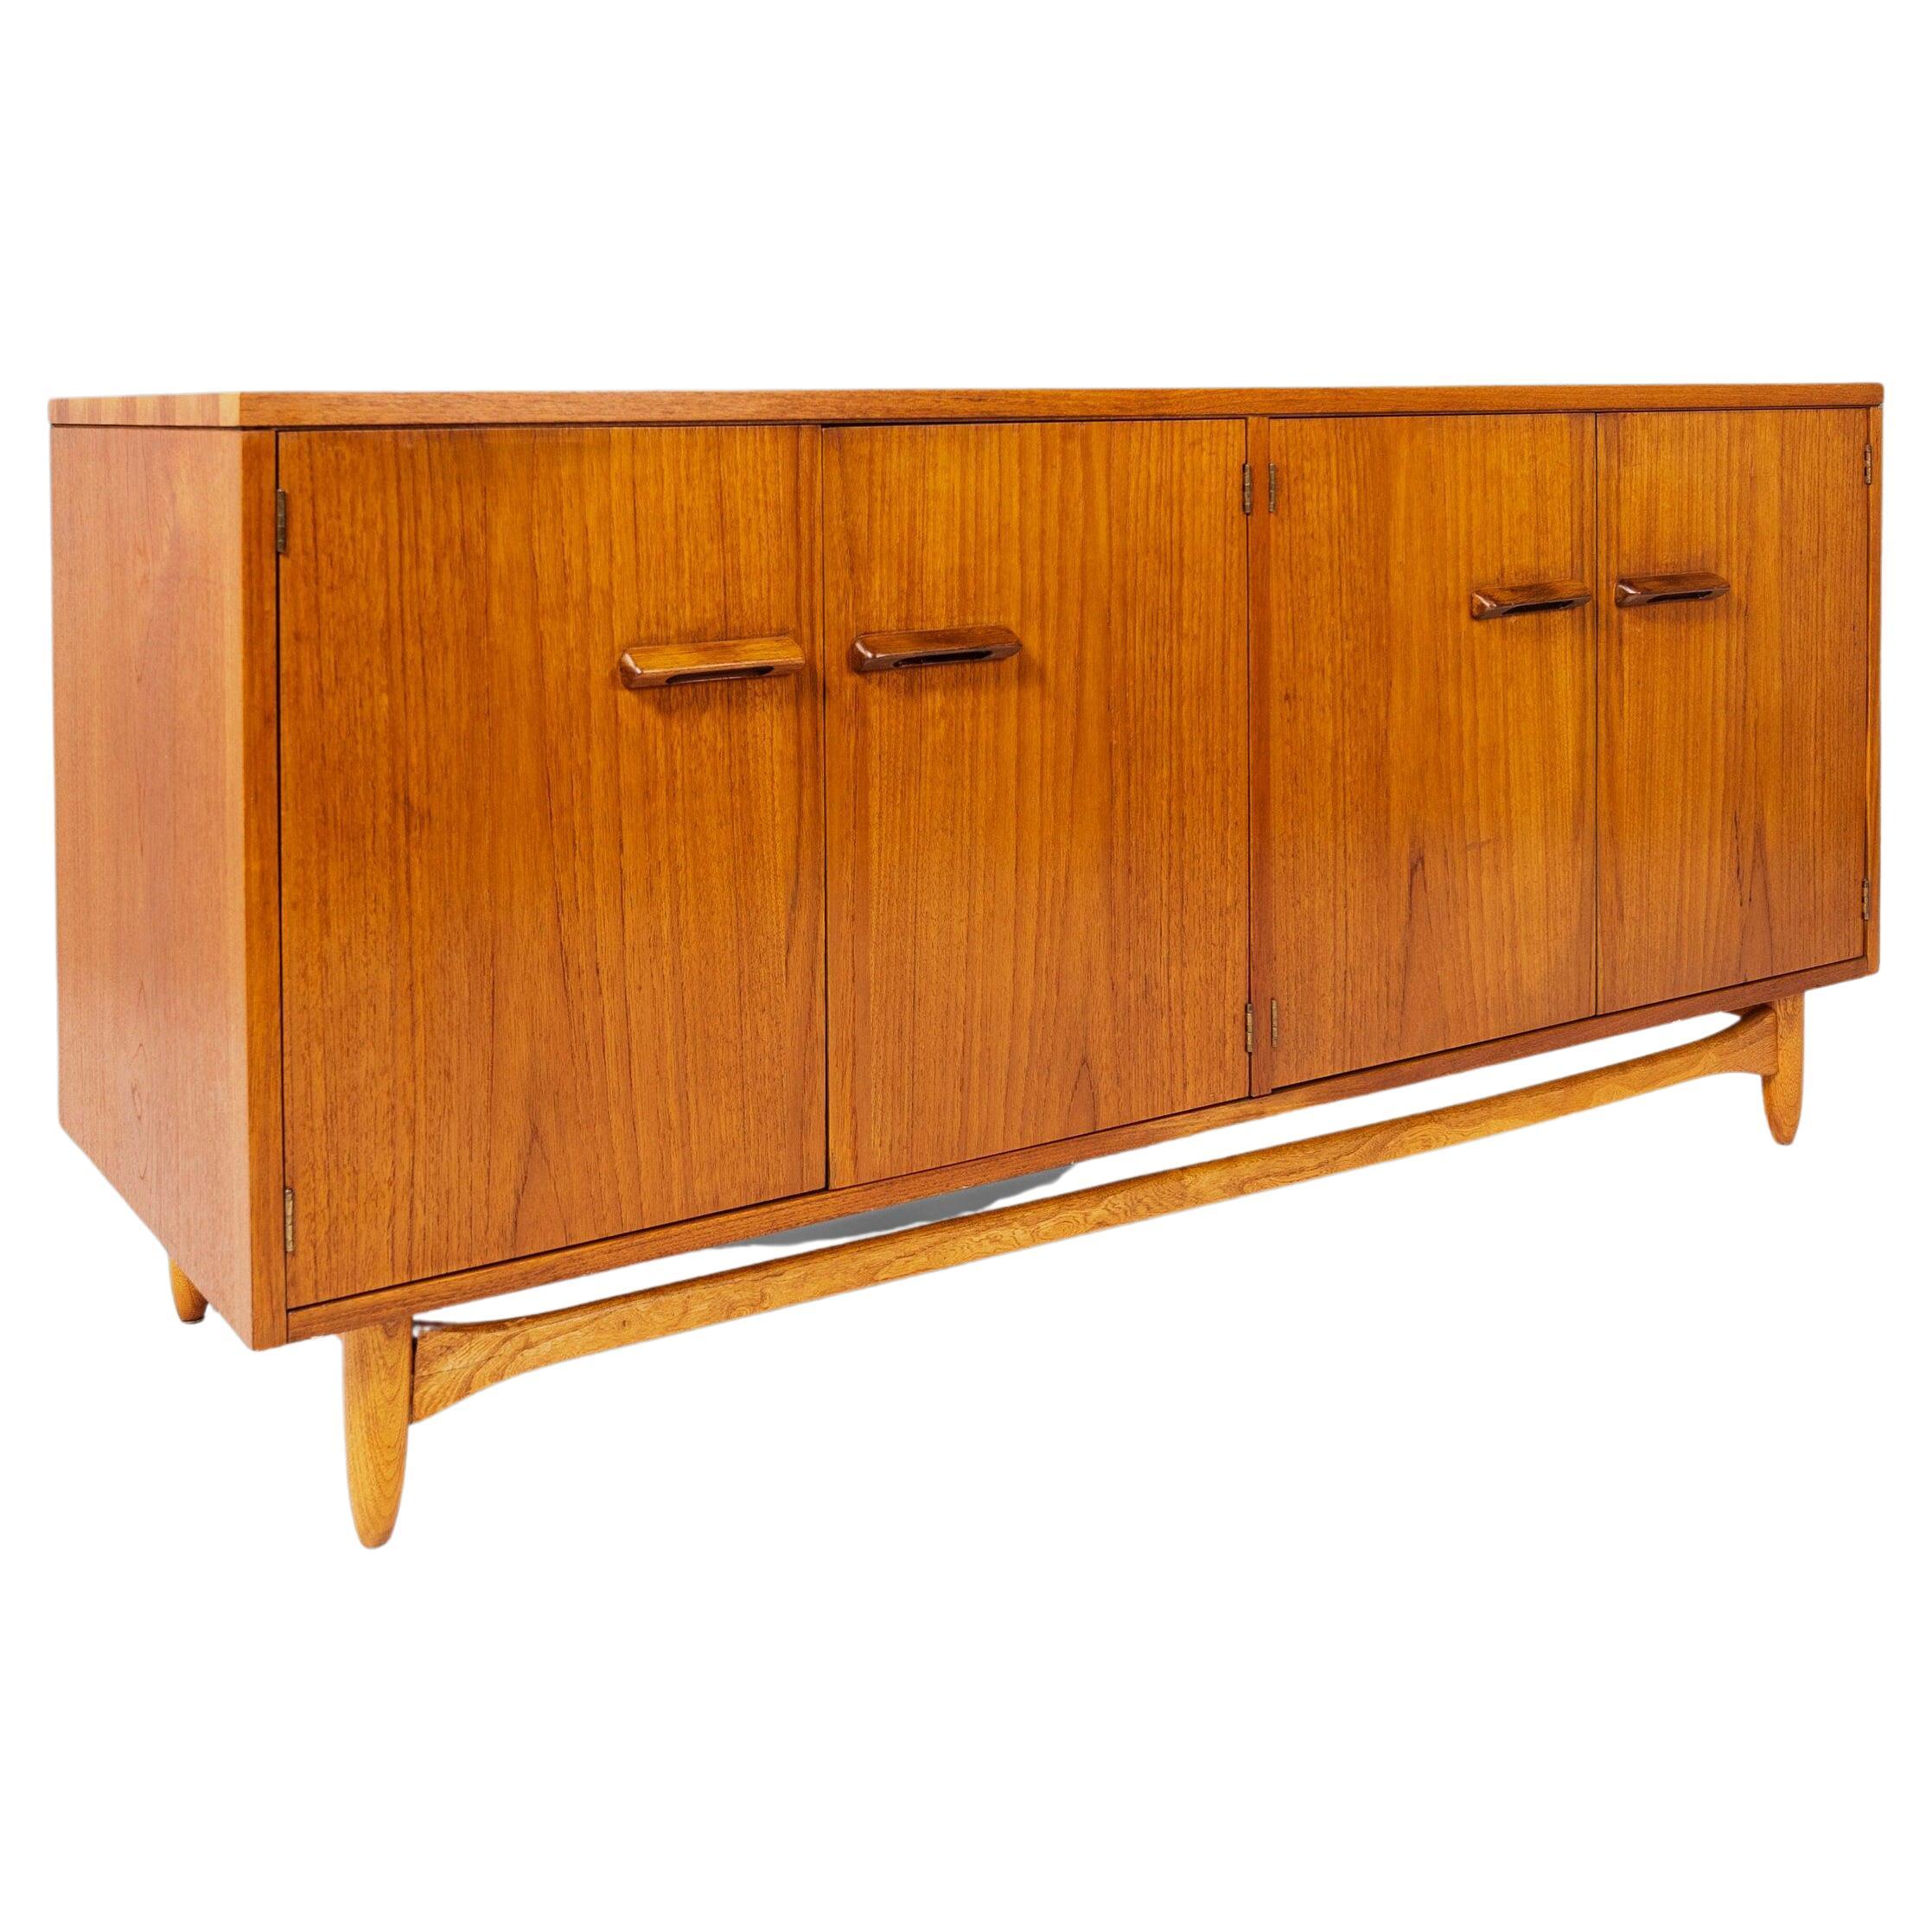 Early Mid Century Modern Lane Acclaim Buffet / Sideboard, USA, c. 1950's For Sale